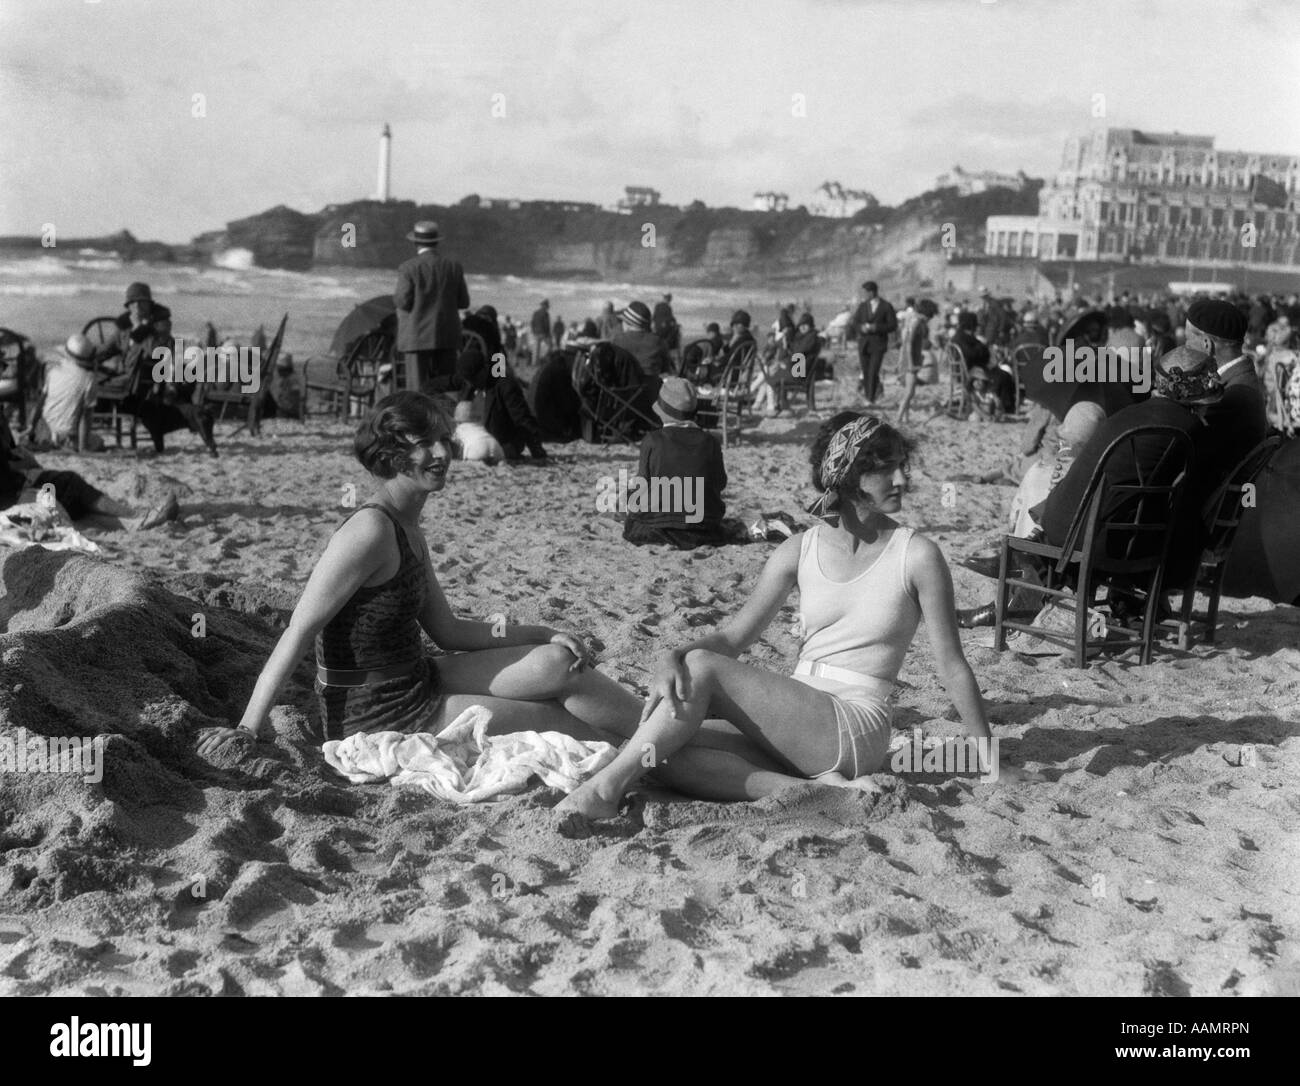 1920s TWO WOMEN SITTING ON BEACH BIARRITZ FRANCE BAY BISCAY BATHING SUIT Stock Photo